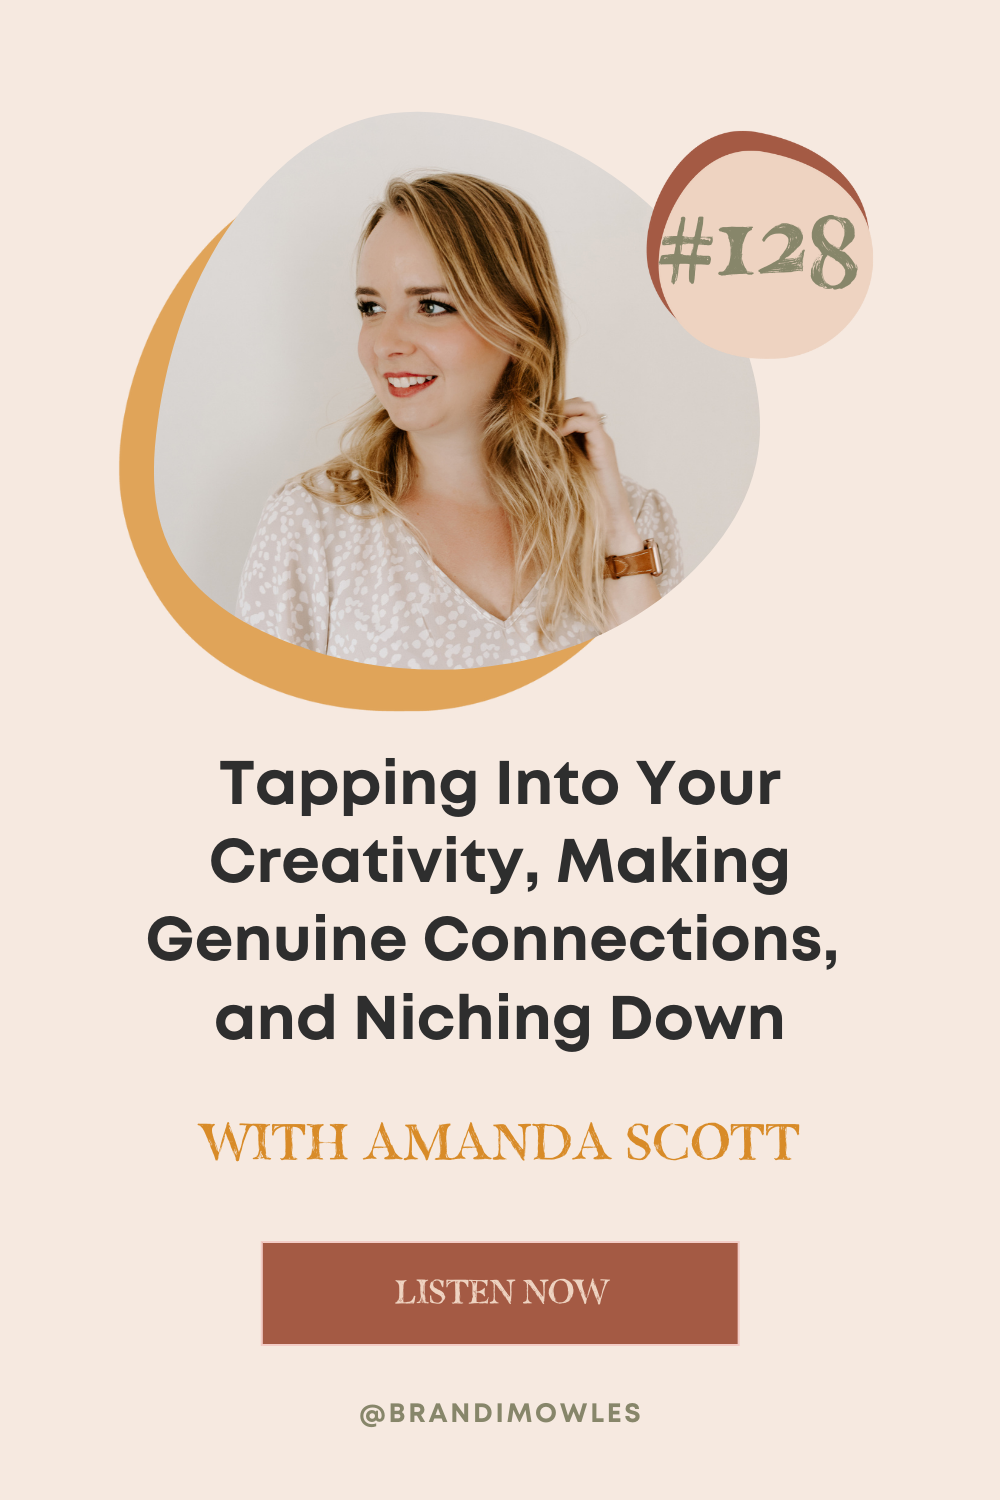 Image of Amanda Scott on featured graphic for Serve Scale Soar podcast